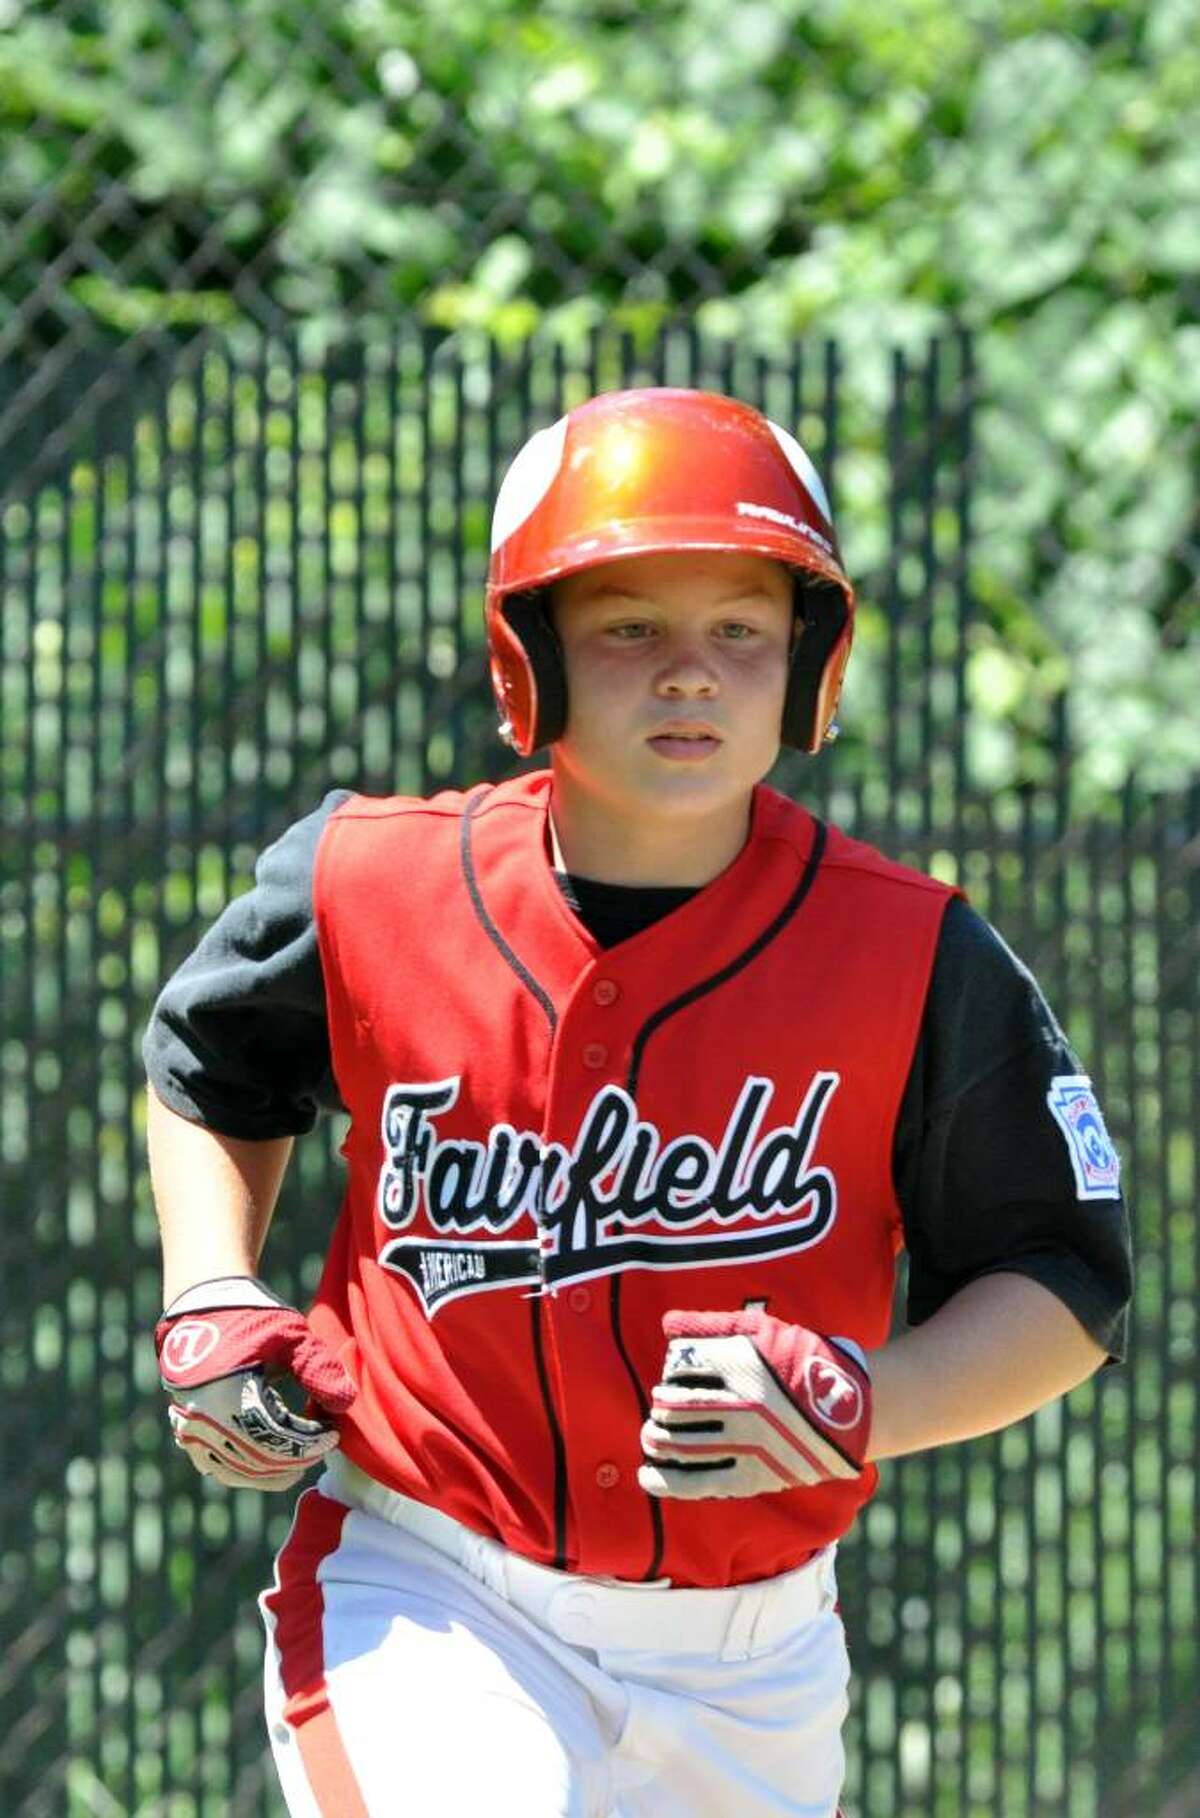 Fairfield American's Jack Quinn runs to first base during the all star little league game against Madison at Blackham School field in Bridgeport on Saturday, July 31, 2010.